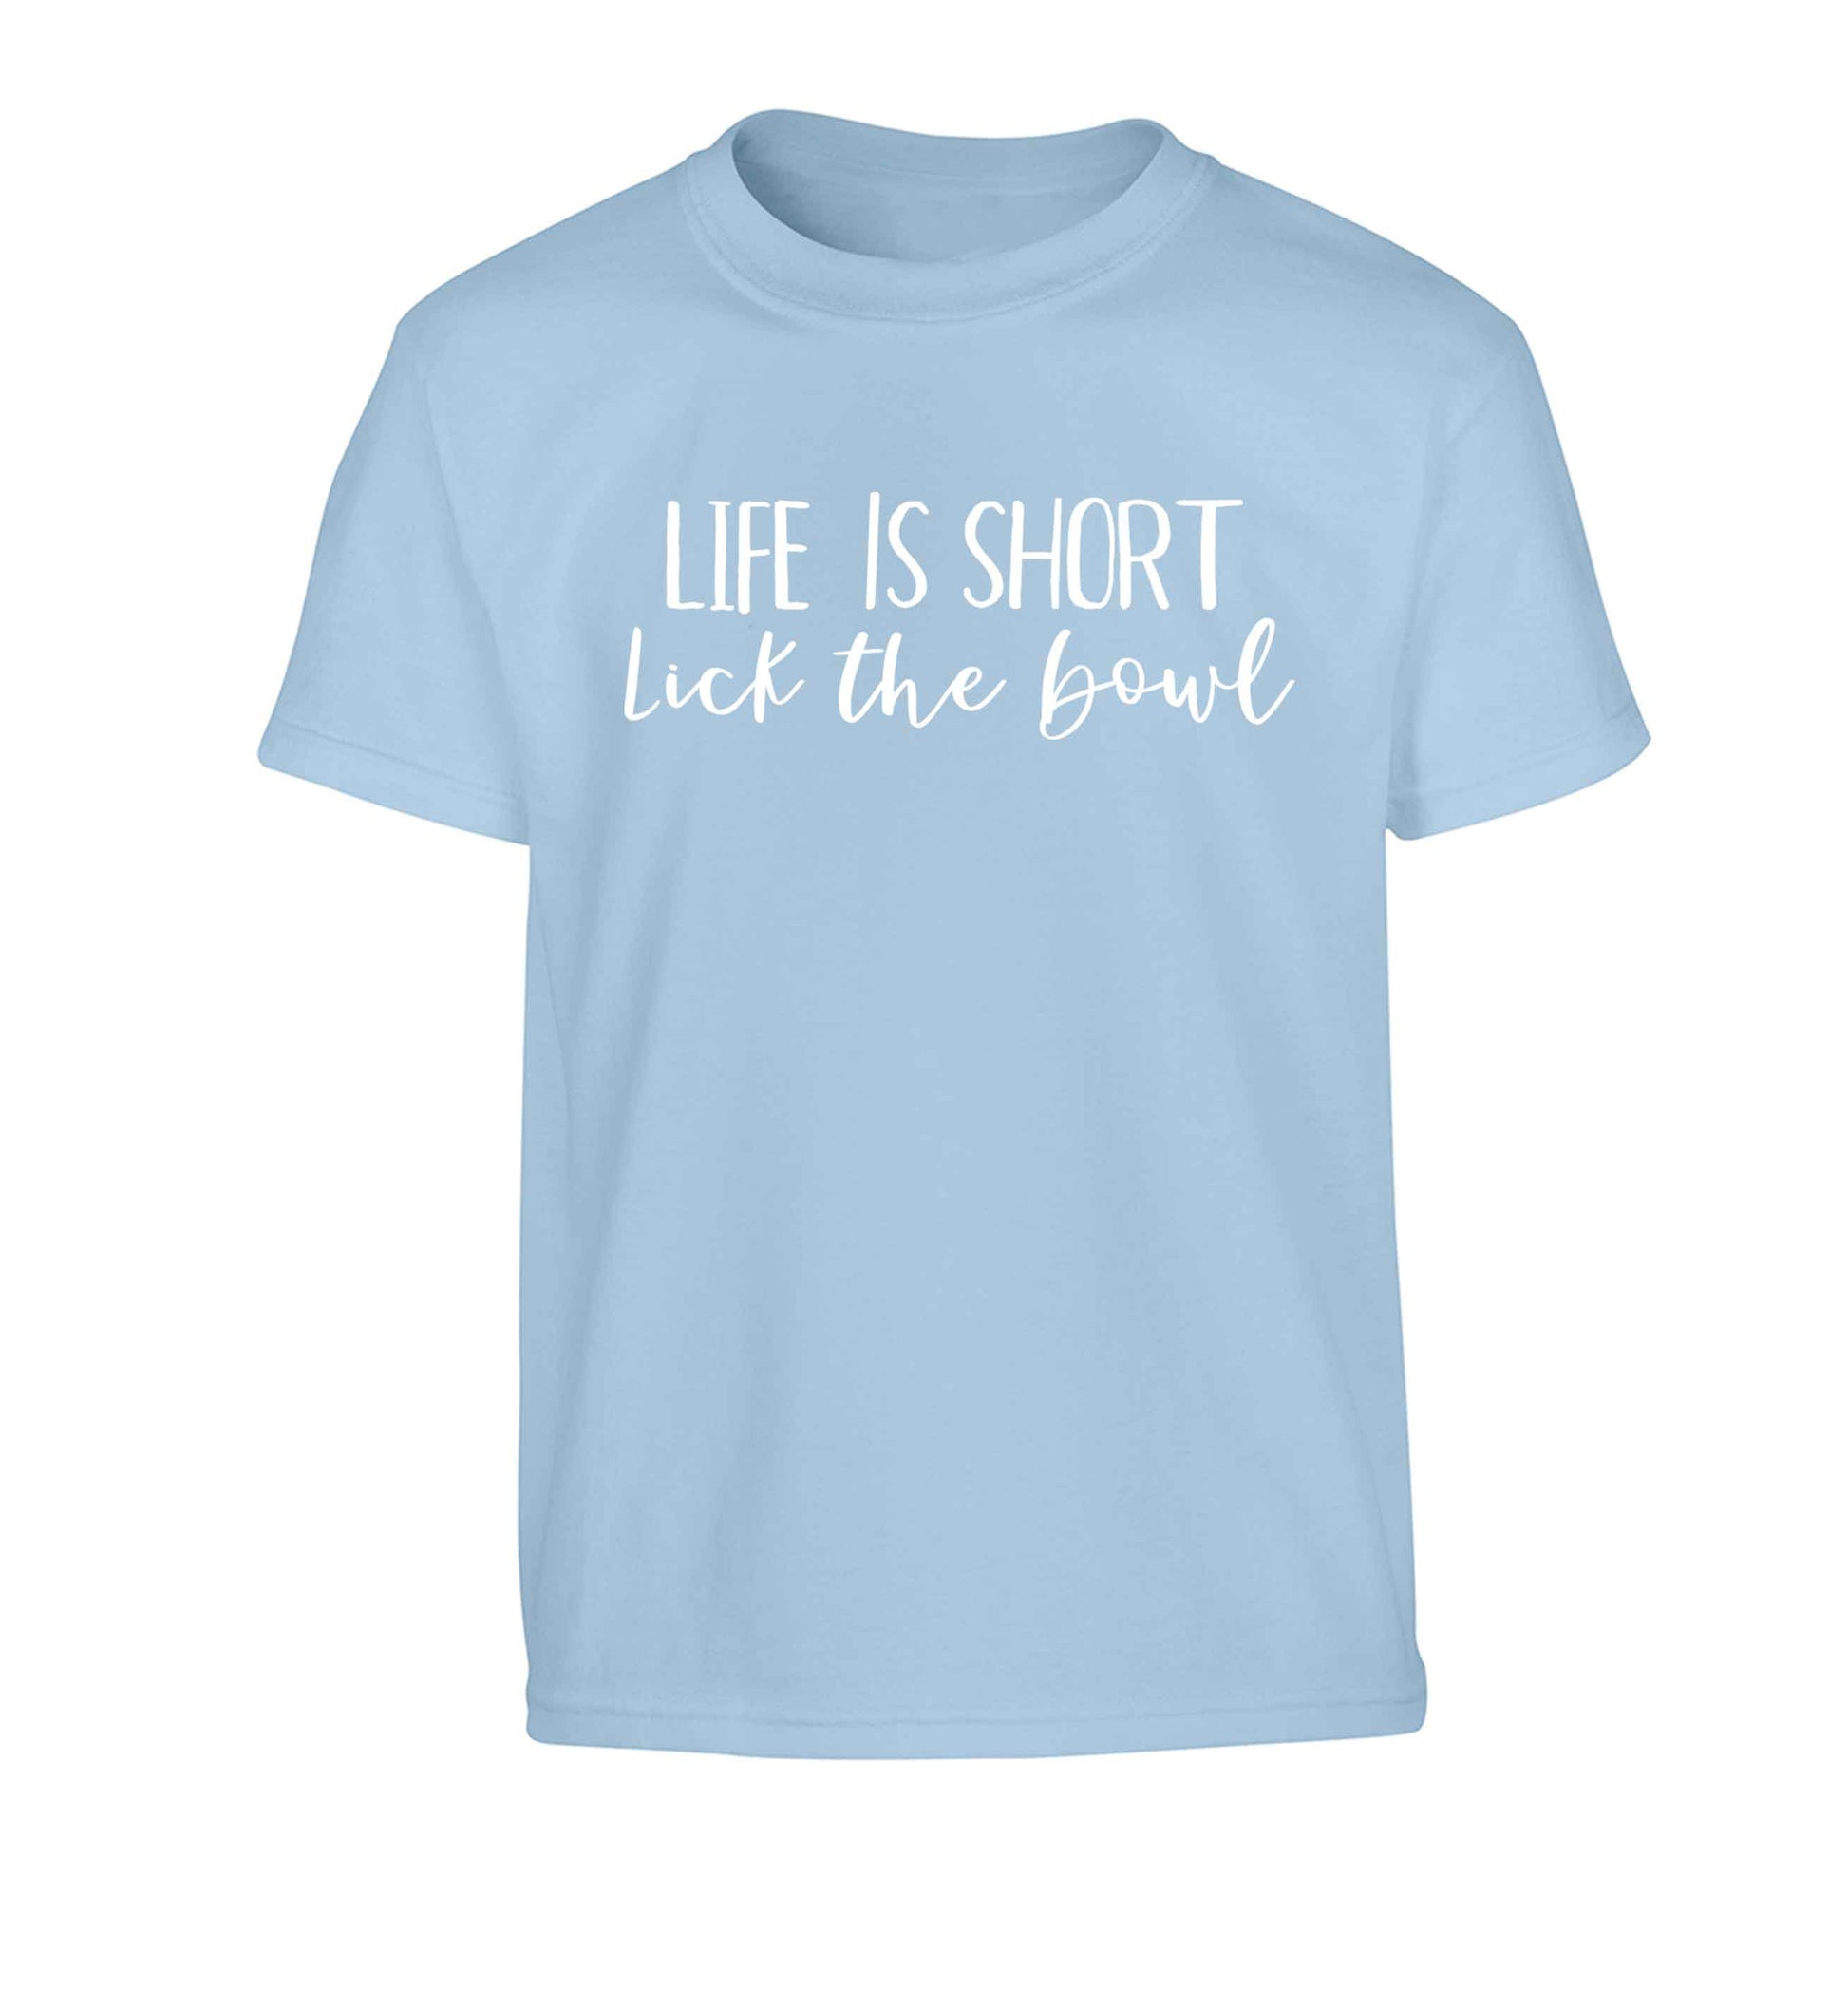 Life is short lick the bowl Children's light blue Tshirt 12-13 Years